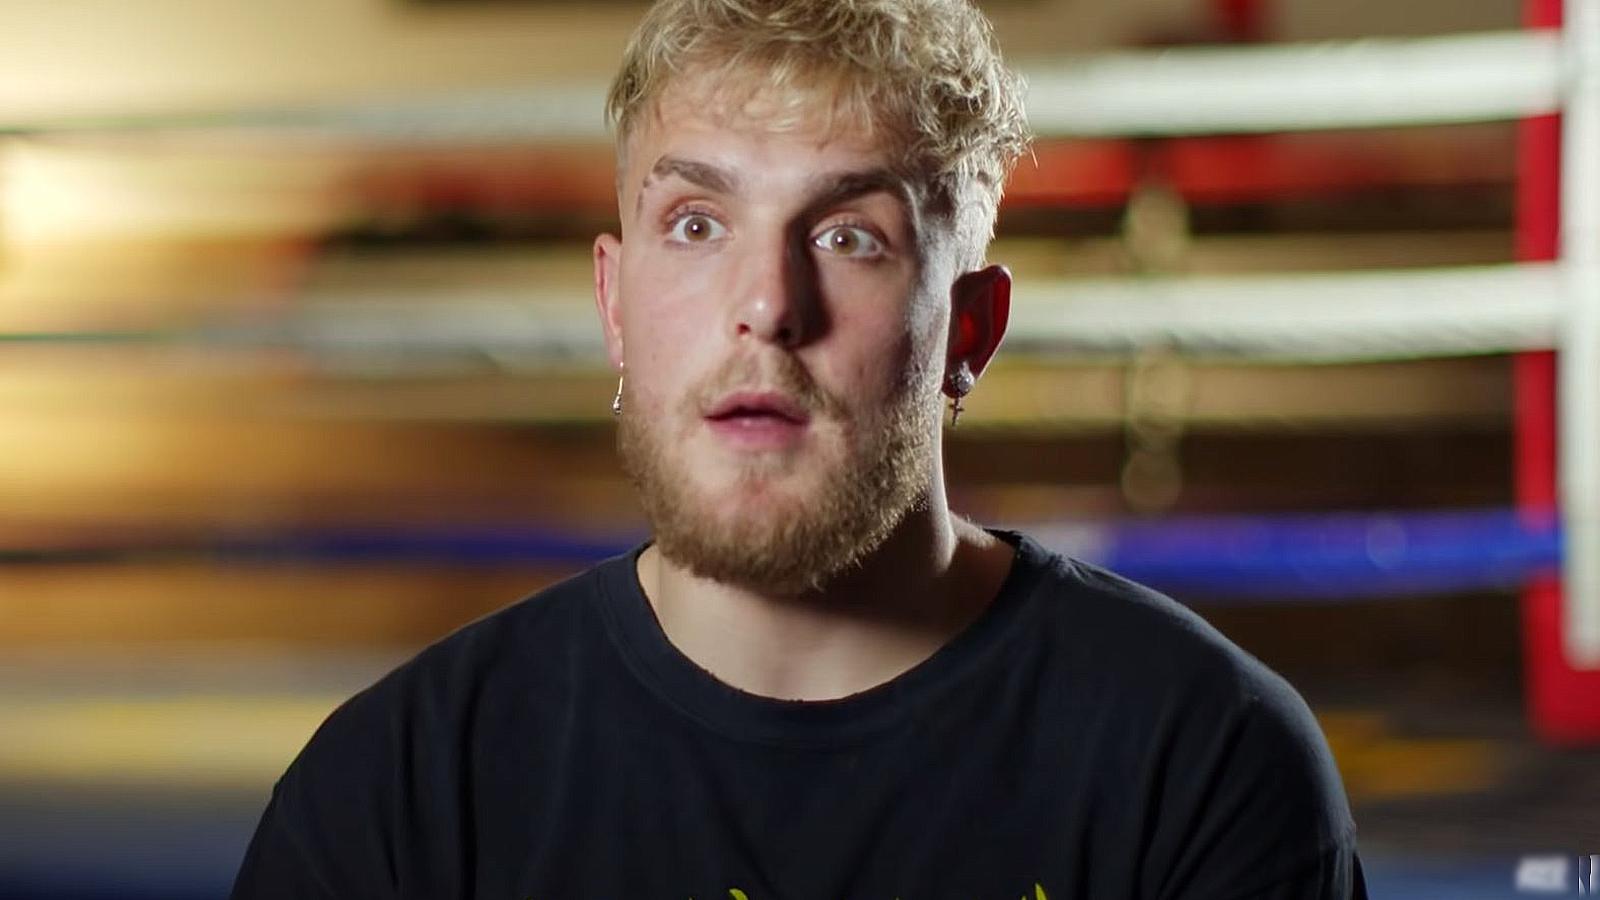 Jake Paul speaks to the camera near a boxing ring.